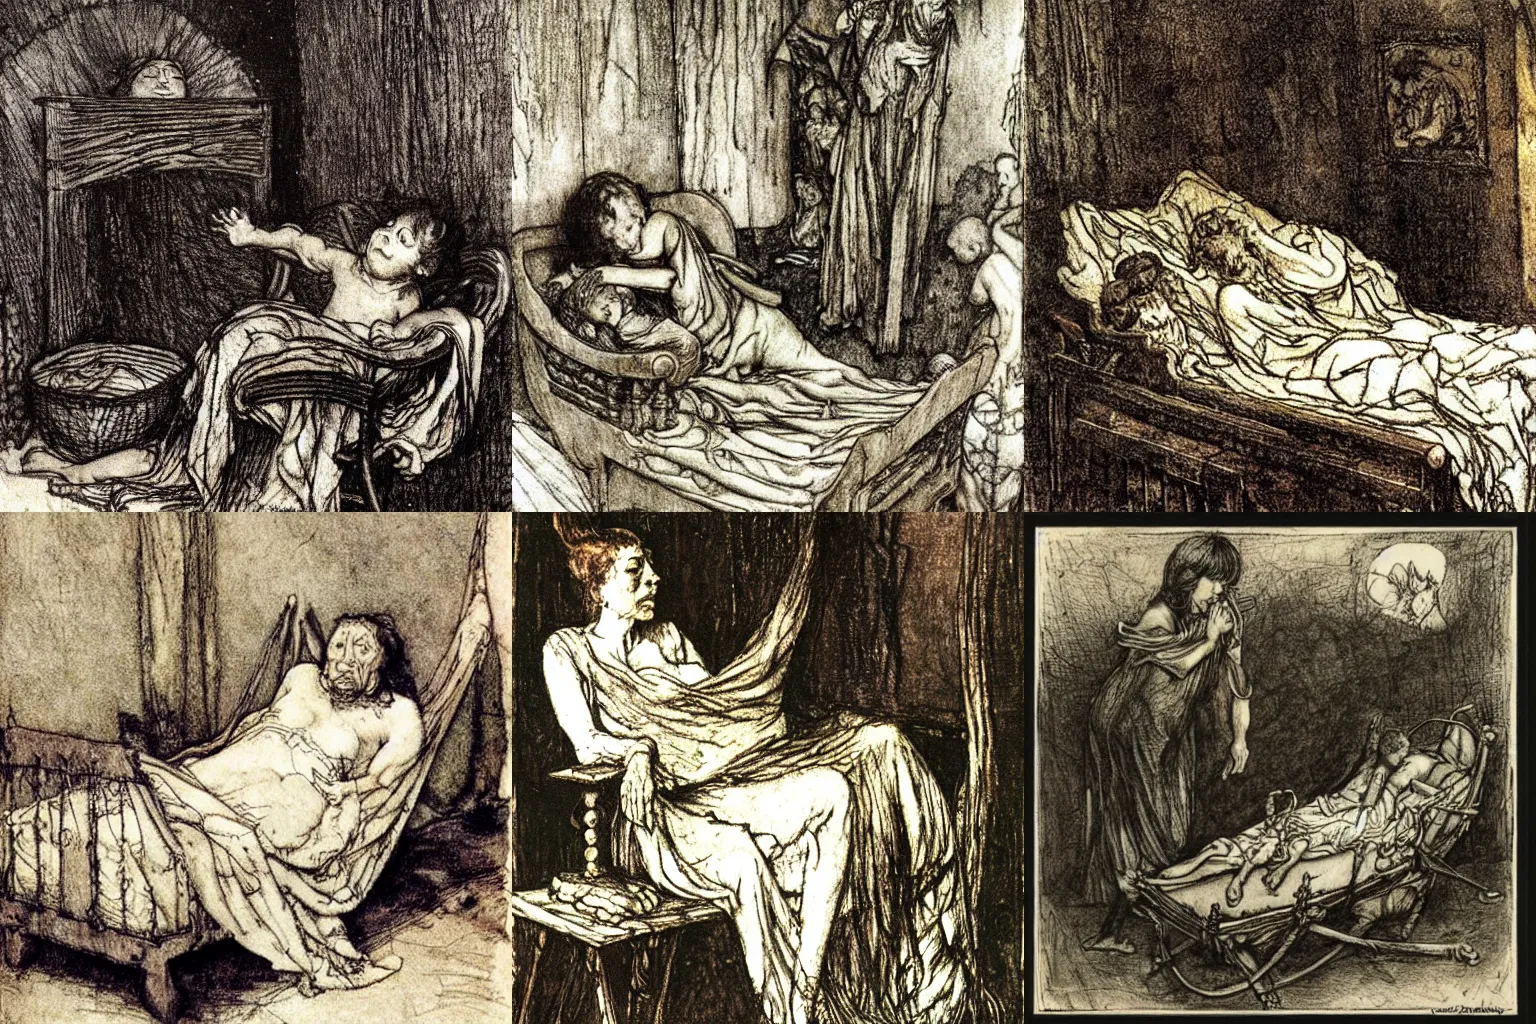 Prompt: 2 0 centuries of stony sleep vexed to nightmare by a rocking cradle. painting by arthur rackham and diego velazquez.